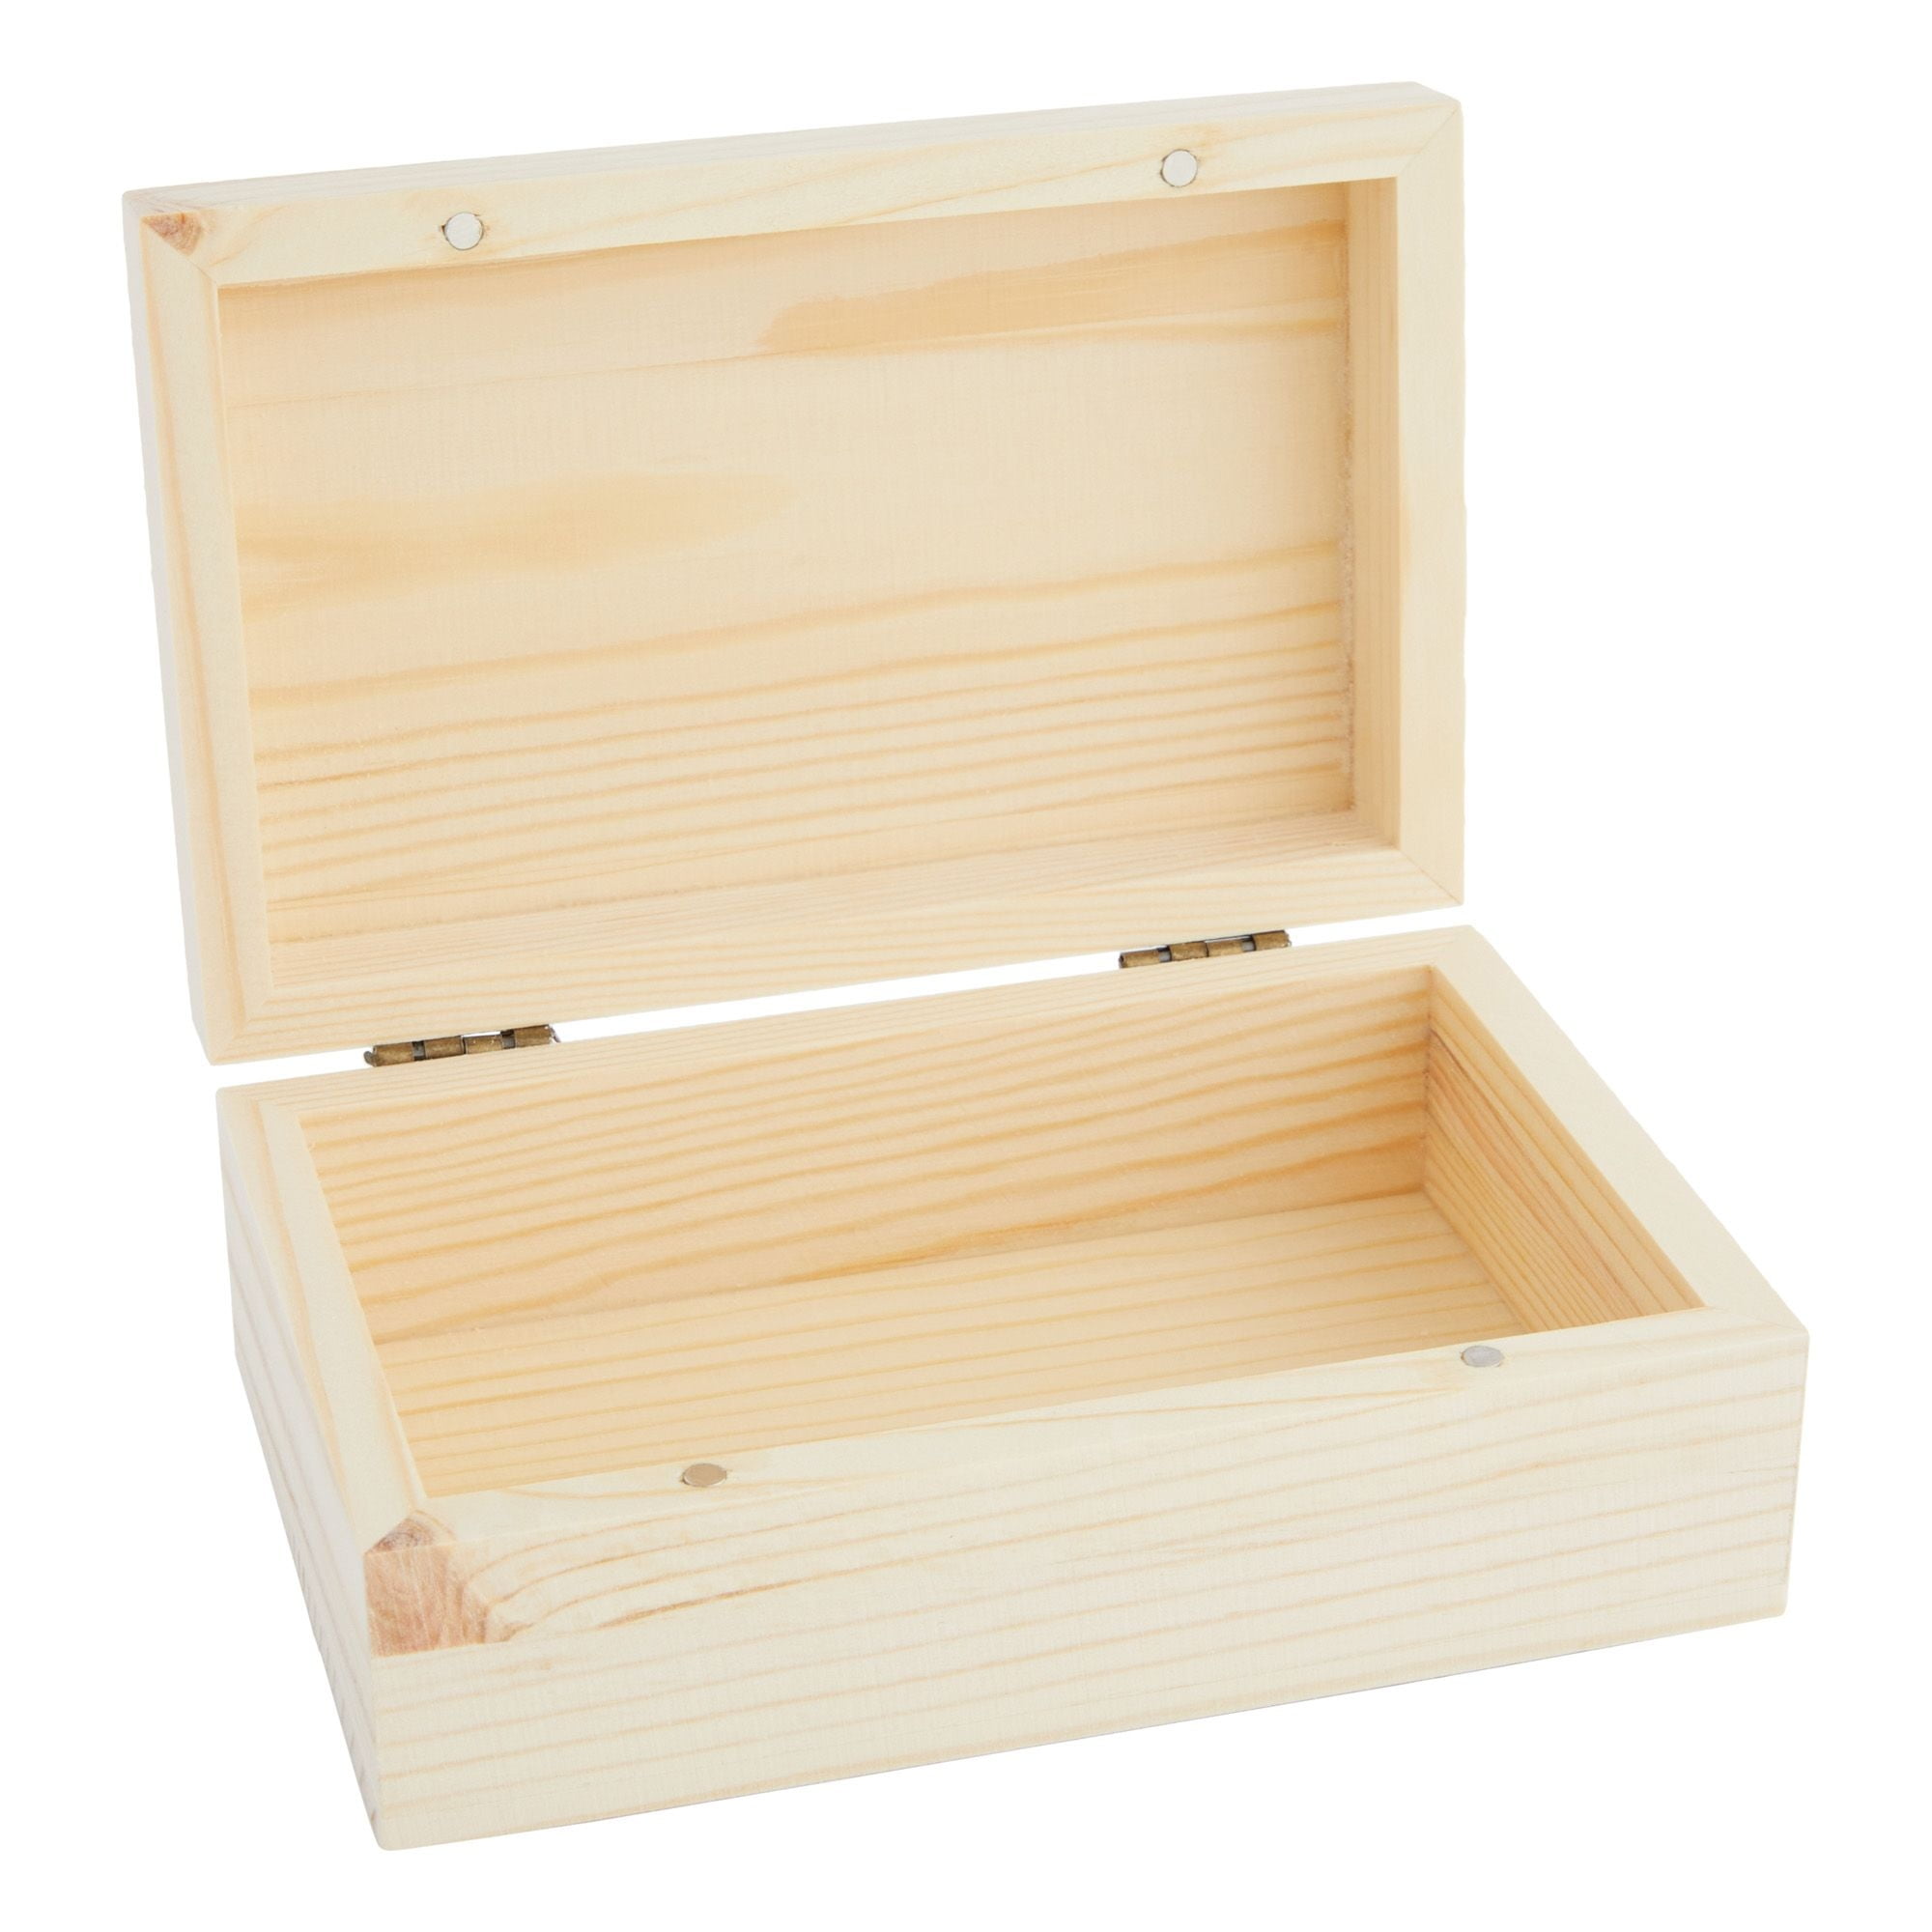 6 Pack Unfinished Wooden Boxes with Hinged Lids, Pinewood Magnetic Wood Box for Crafts, Jewelry Storage (3.5 x 3.5 x 2 in)